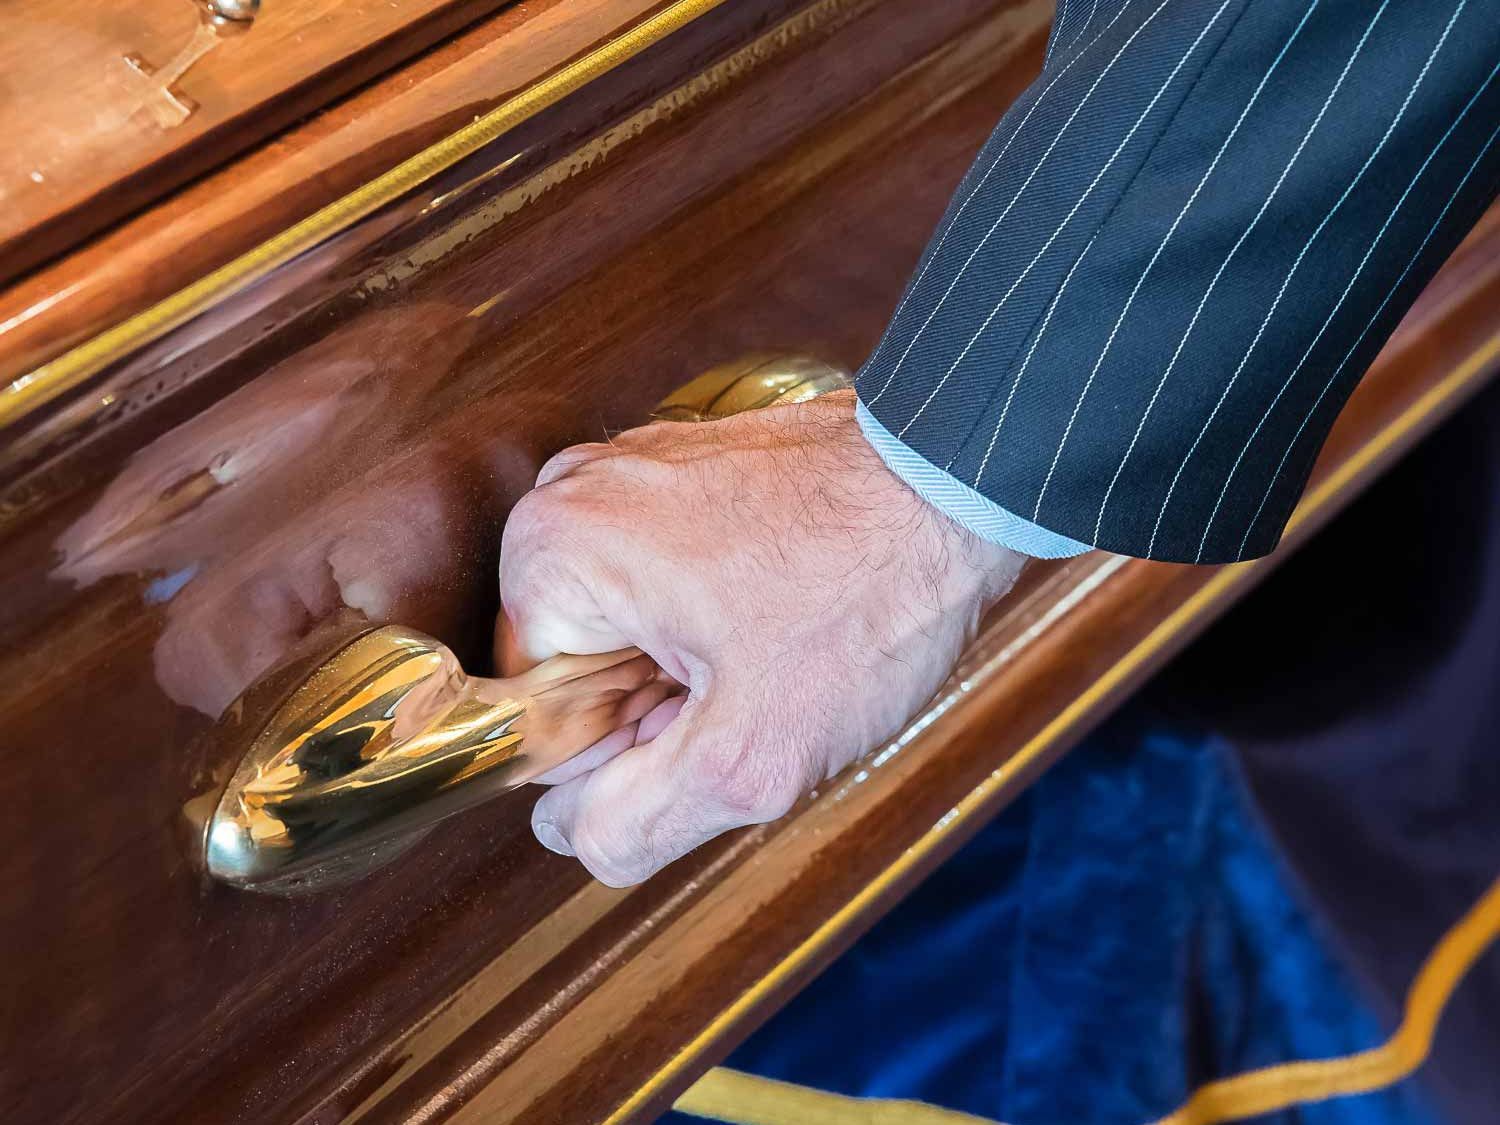 Holding the gold handle of a coffin